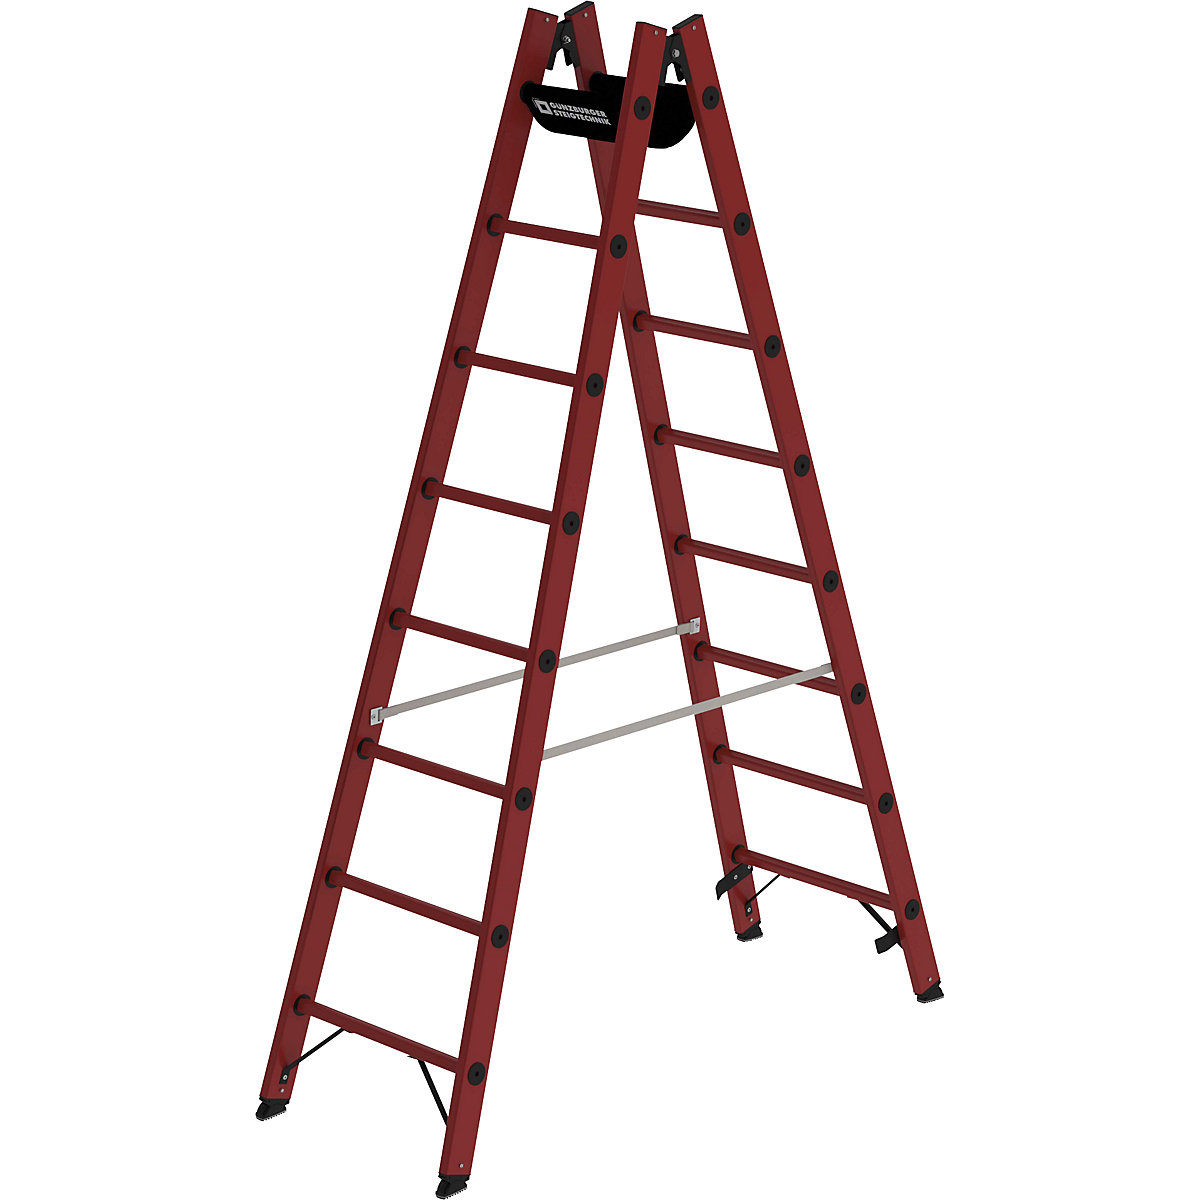 Solid plastic ladder – MUNK, made entirely of GRP, 2 x 8 rungs-7